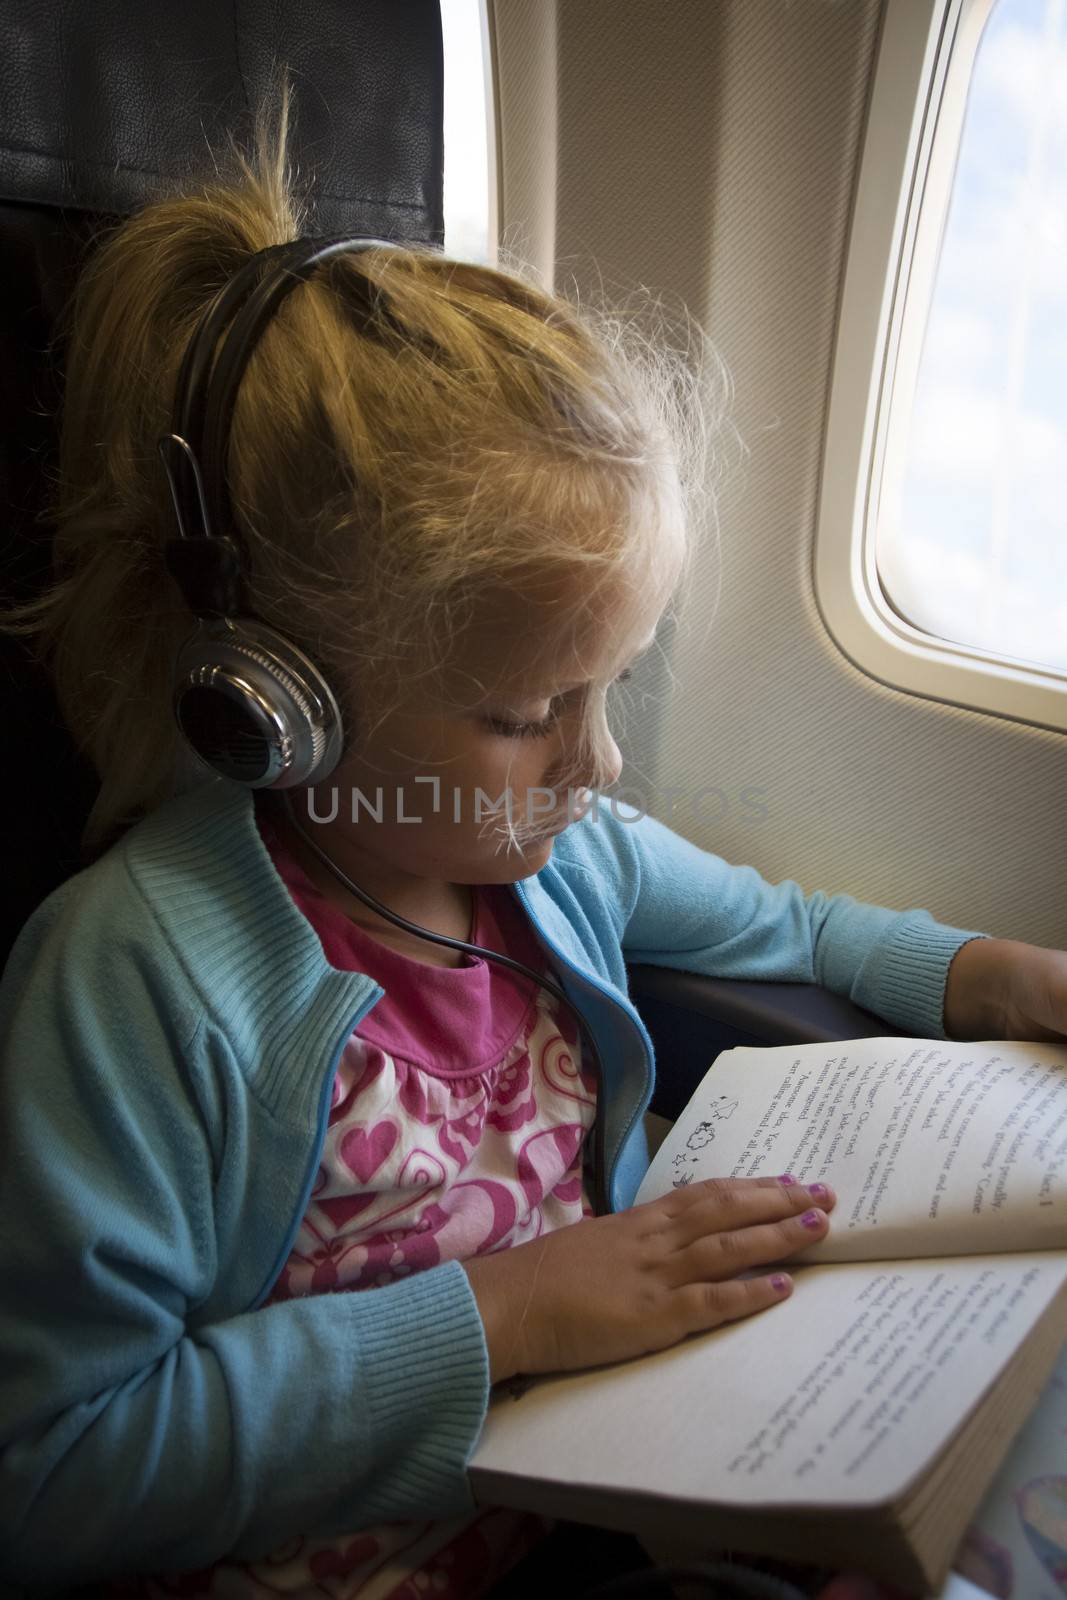 Child in airplane by annems